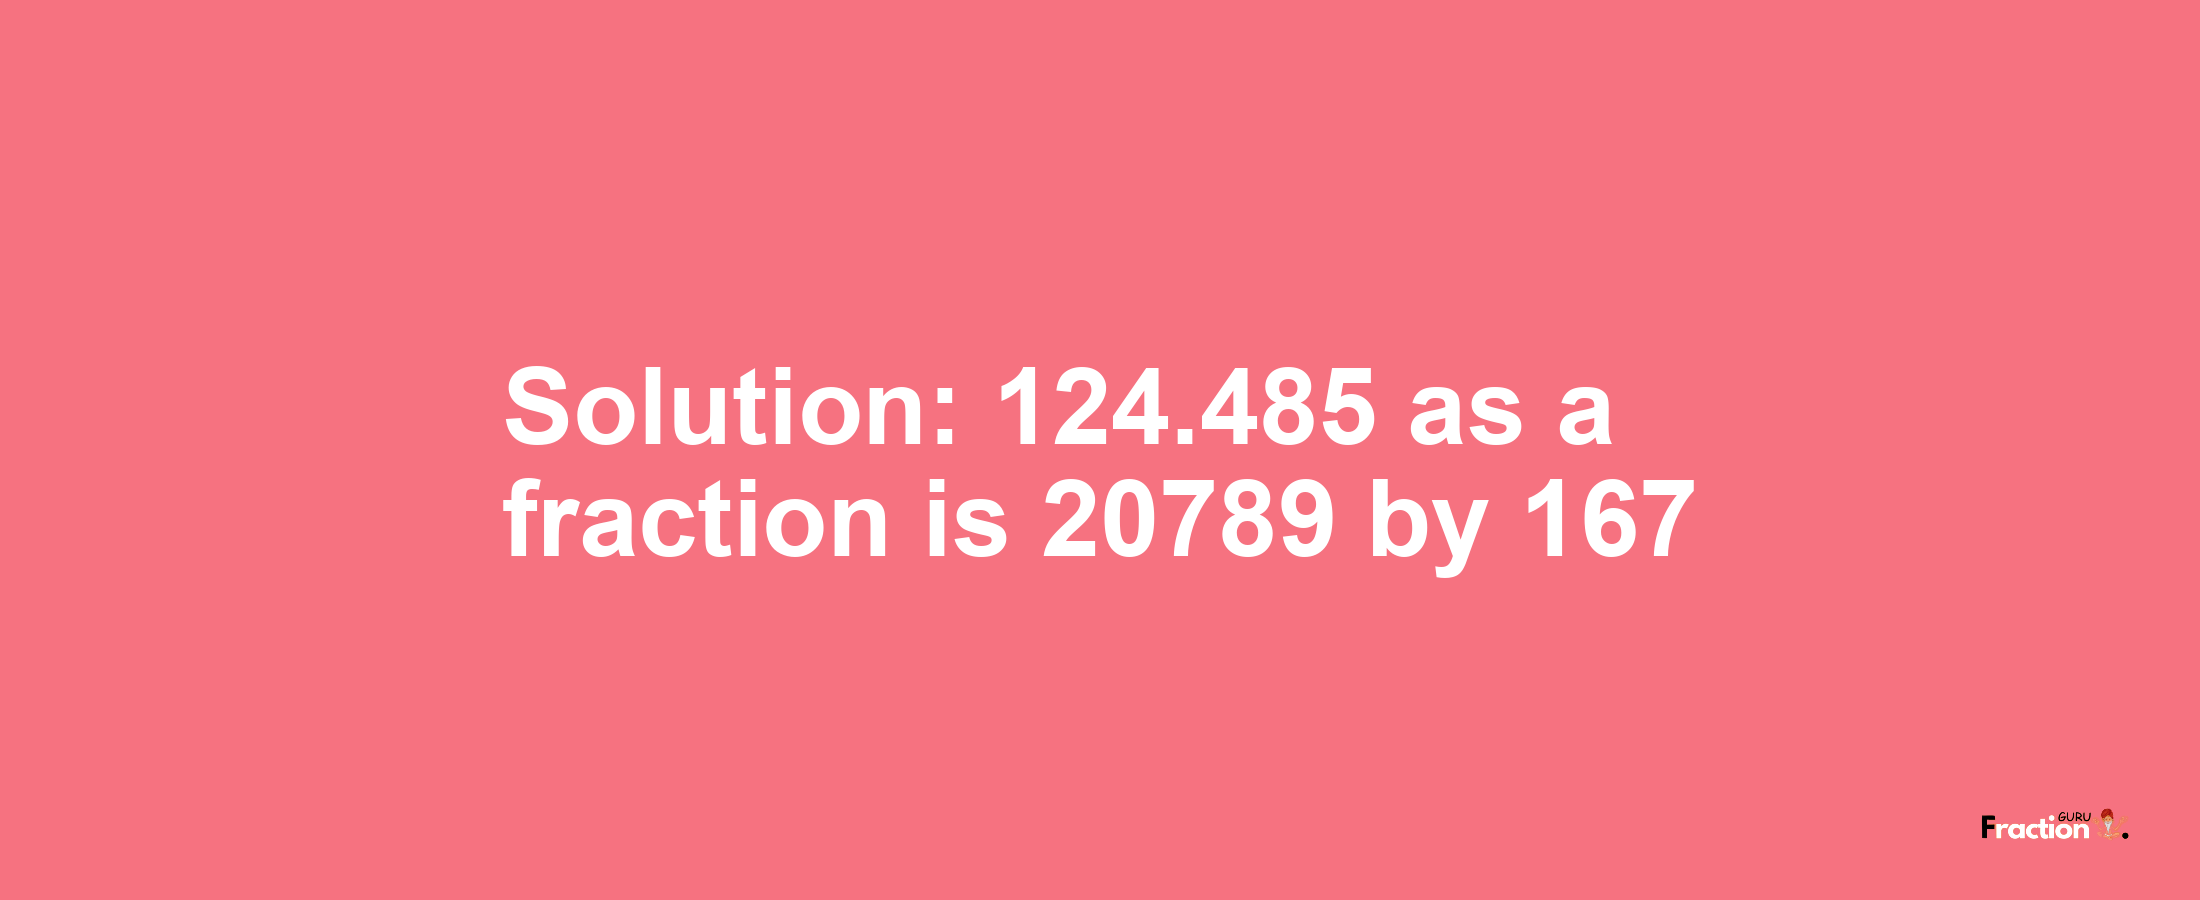 Solution:124.485 as a fraction is 20789/167